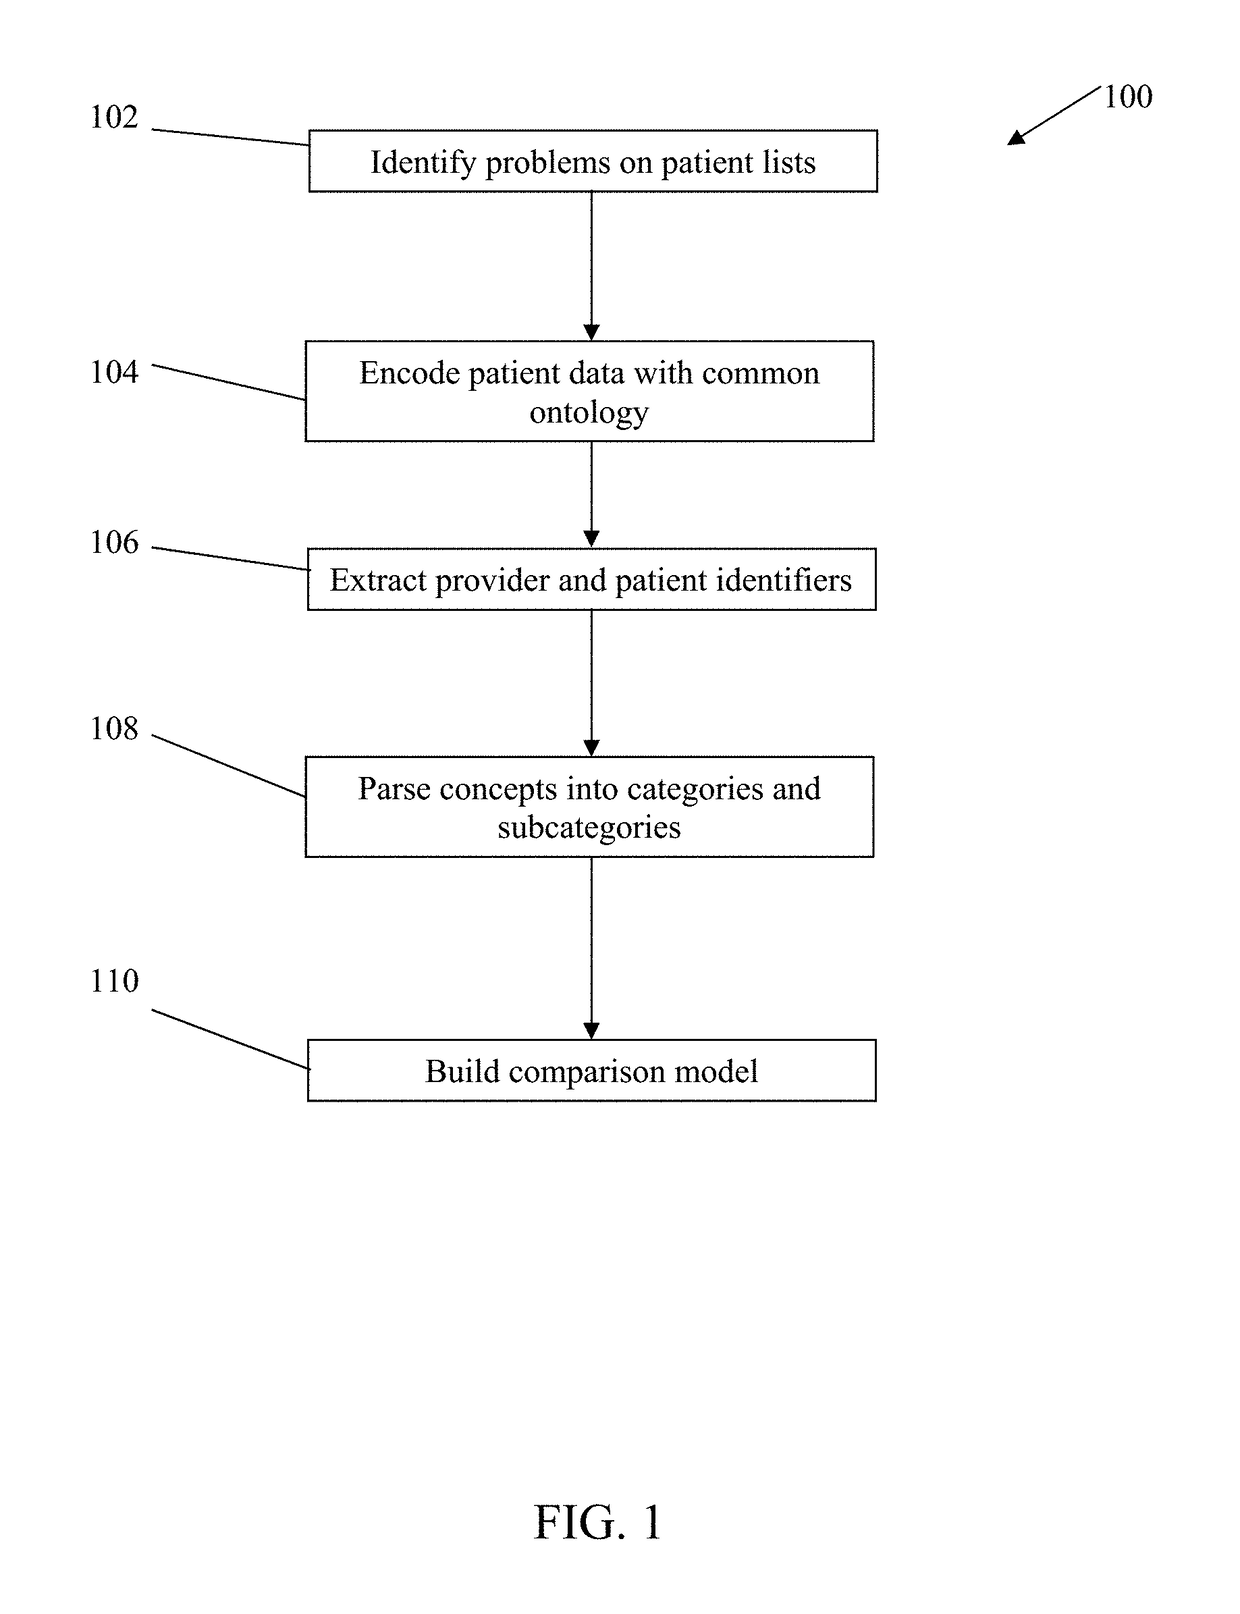 Method and System for Extracting Data From a Plurality of Electronic Data Stores of Patient Data to Provide Provider and Patient Data Similarity Scoring